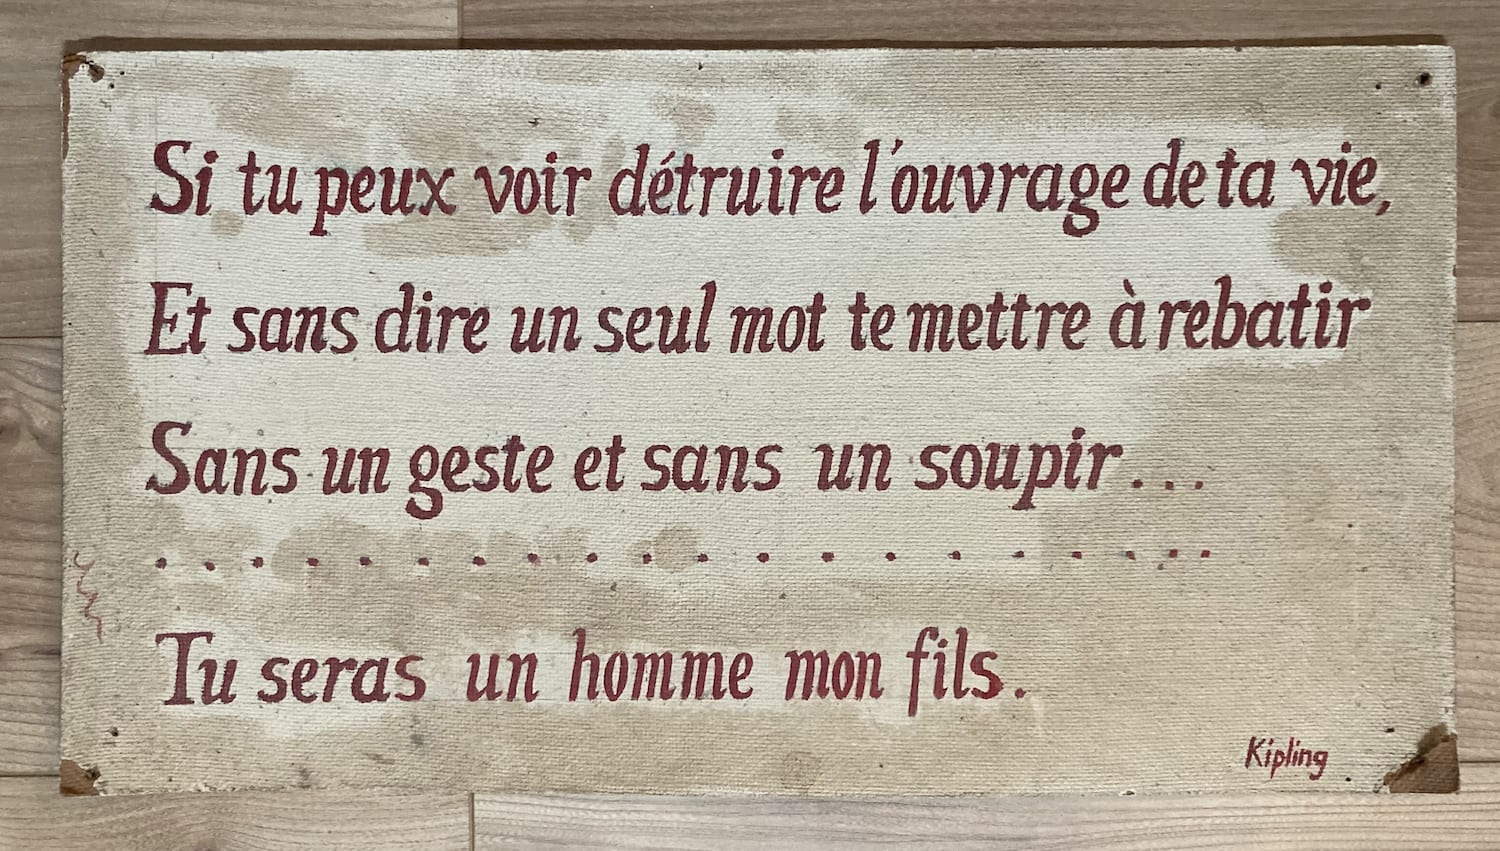 A hardboard pannel with handwritten text in red. It has lines from the poem below in French.